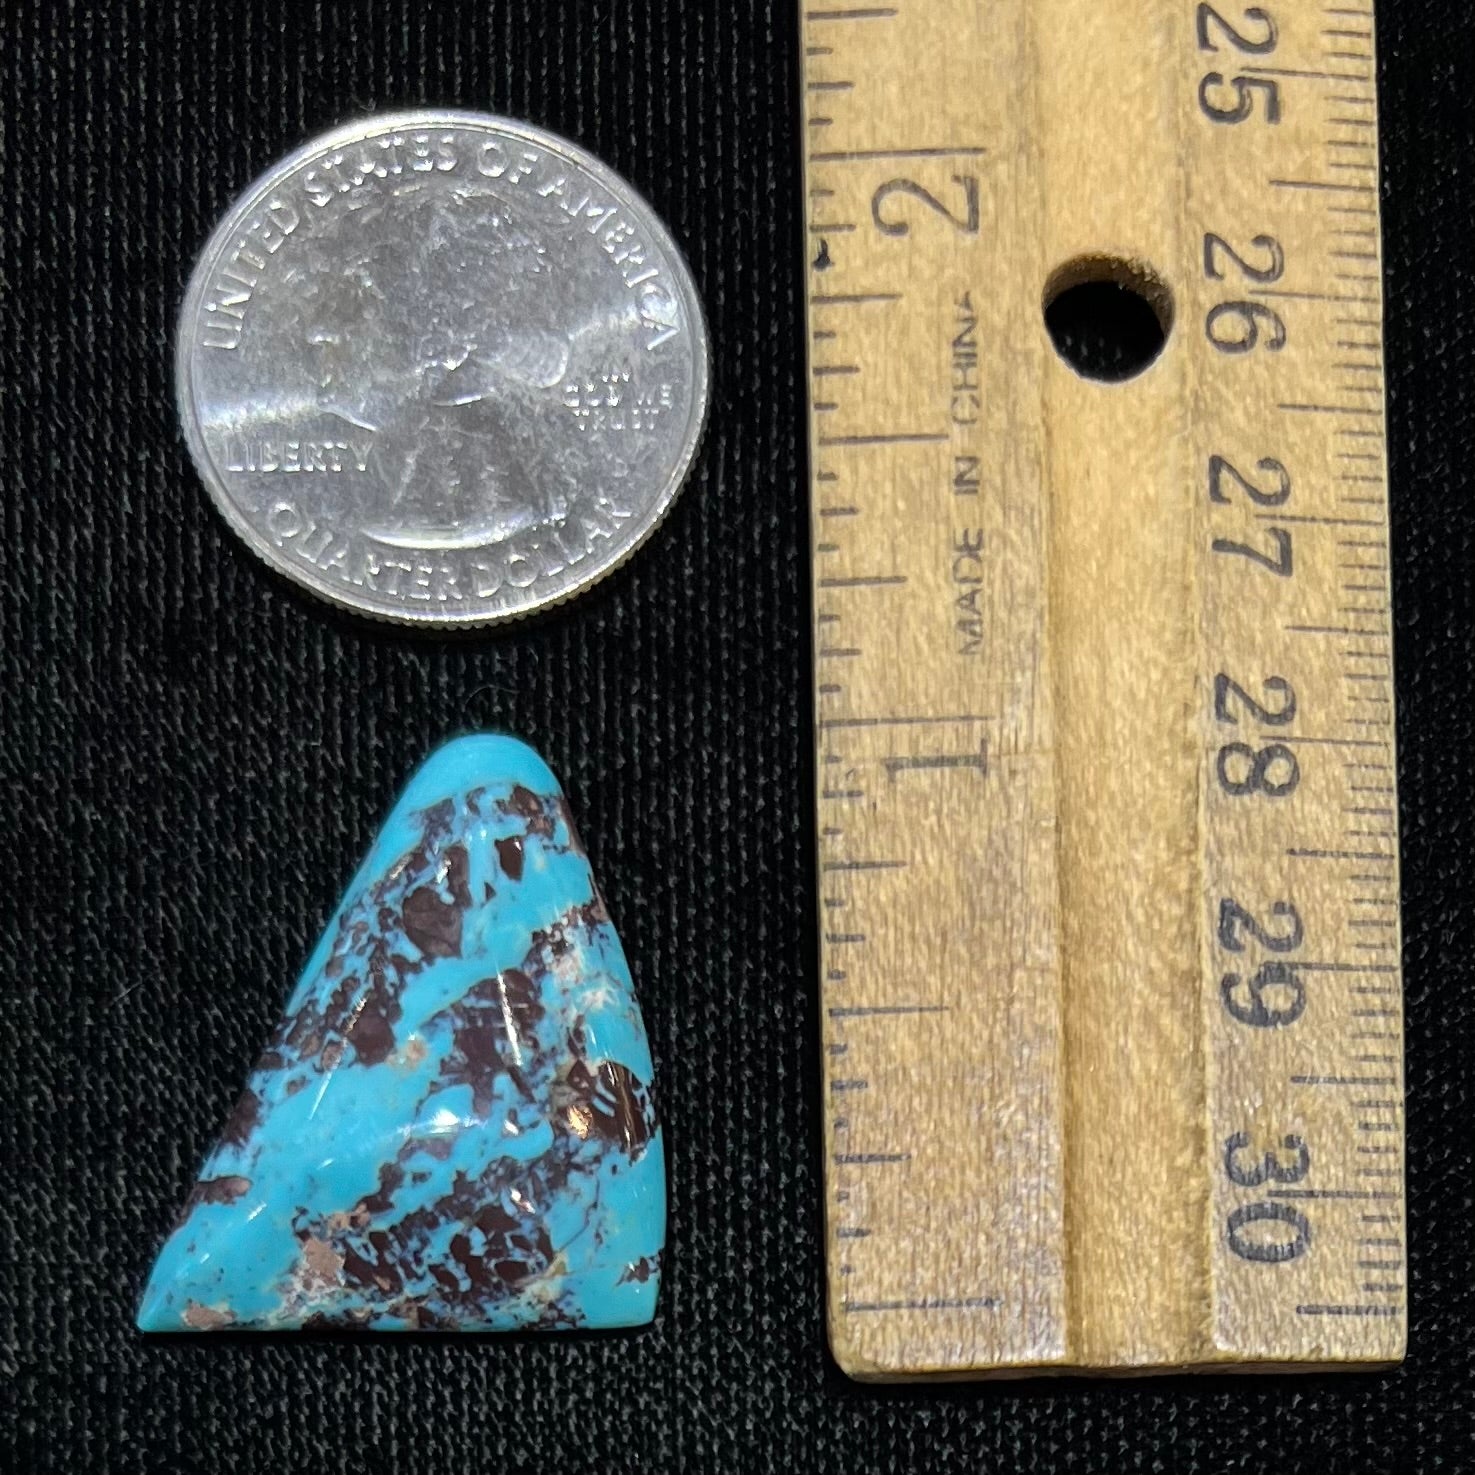 A triangular cabochon cut blue turquoise with red matrix from Mohave County, Arizona.